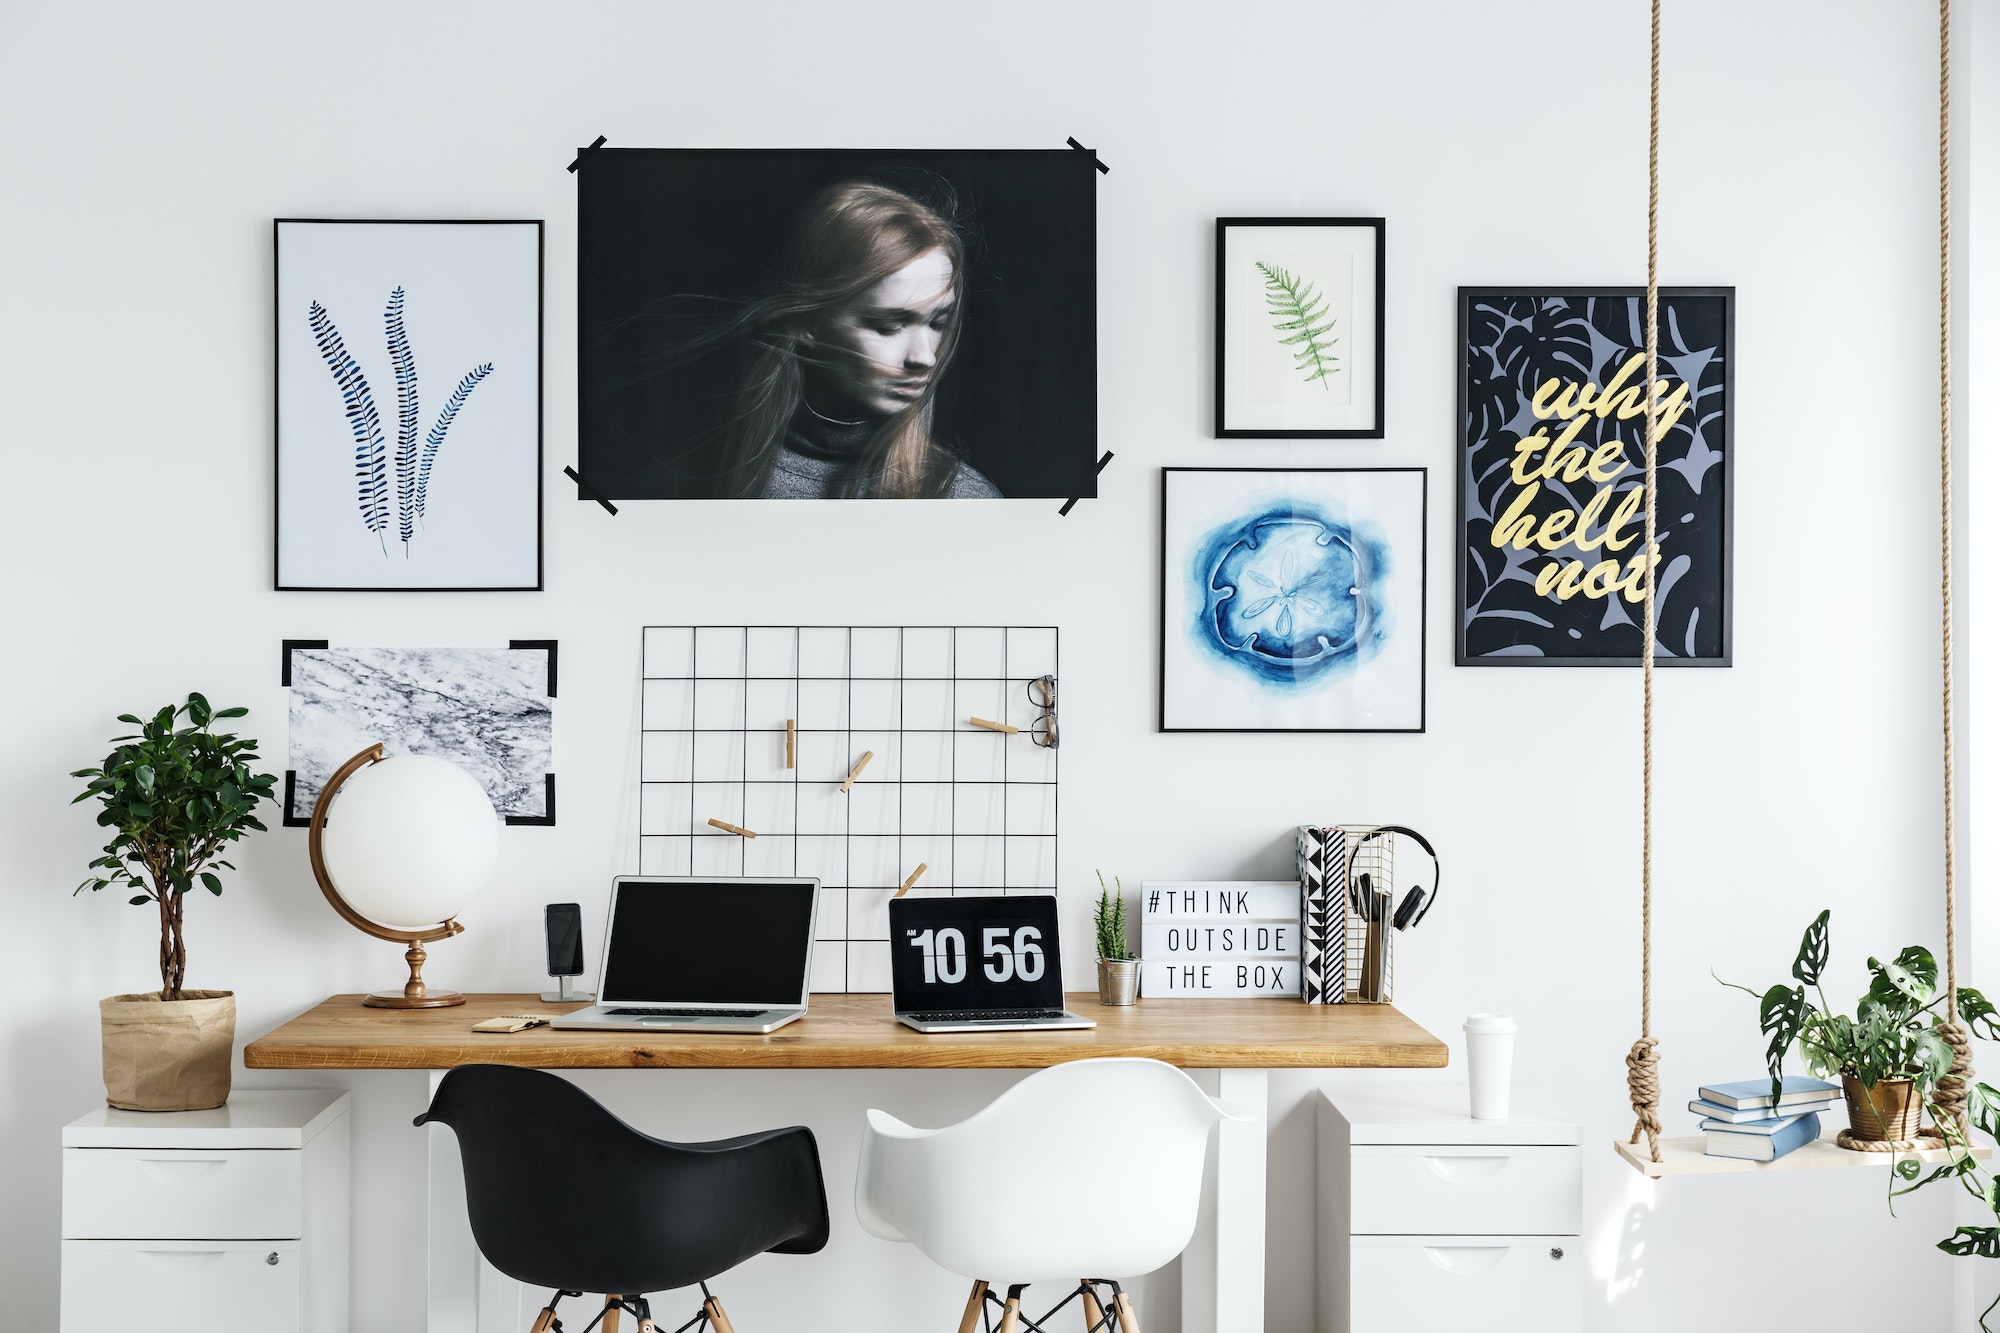 Show your art collection by making a gallery wall